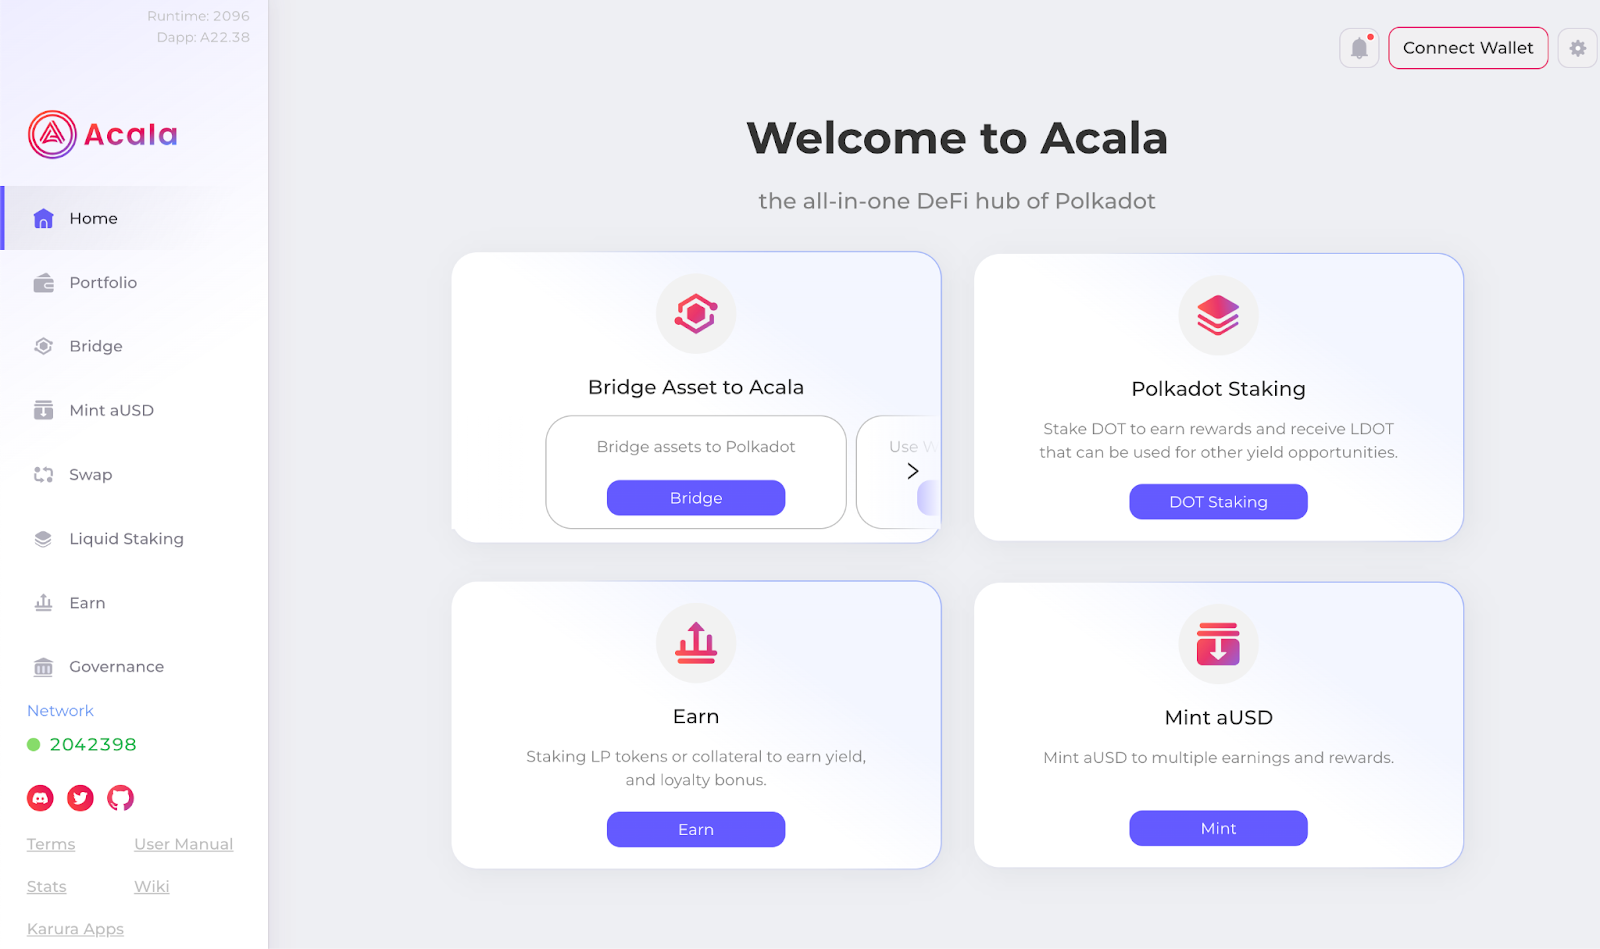 Giao diện của Acala Network